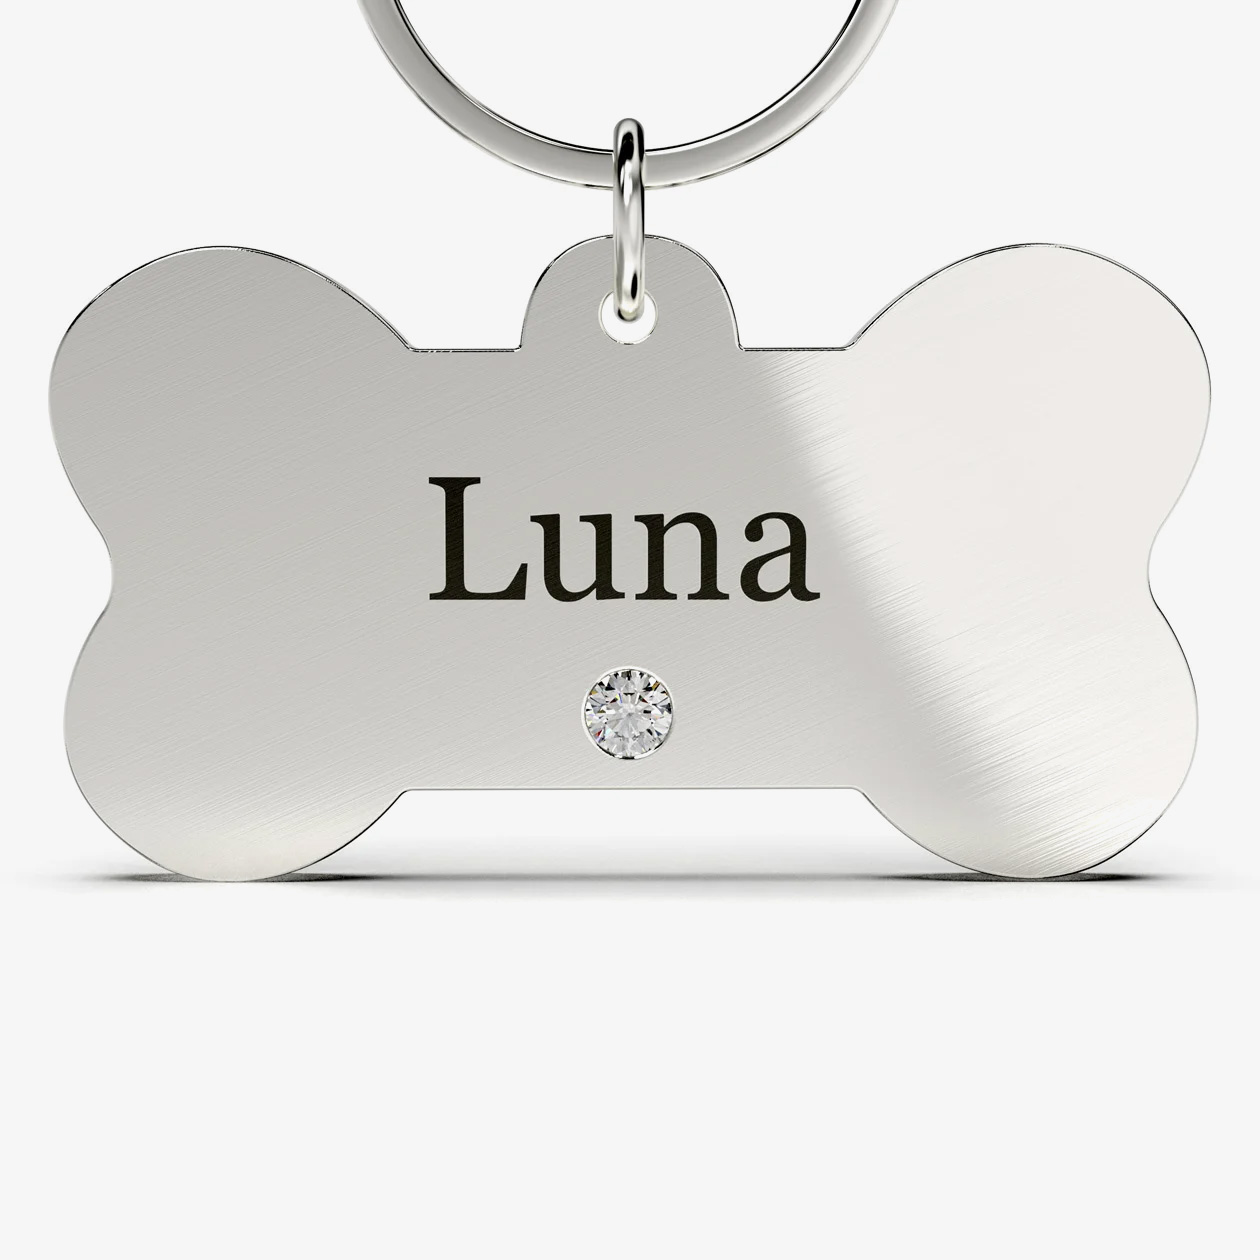 STAINLESS POSH POOCH PET NAME TAG FEATURED